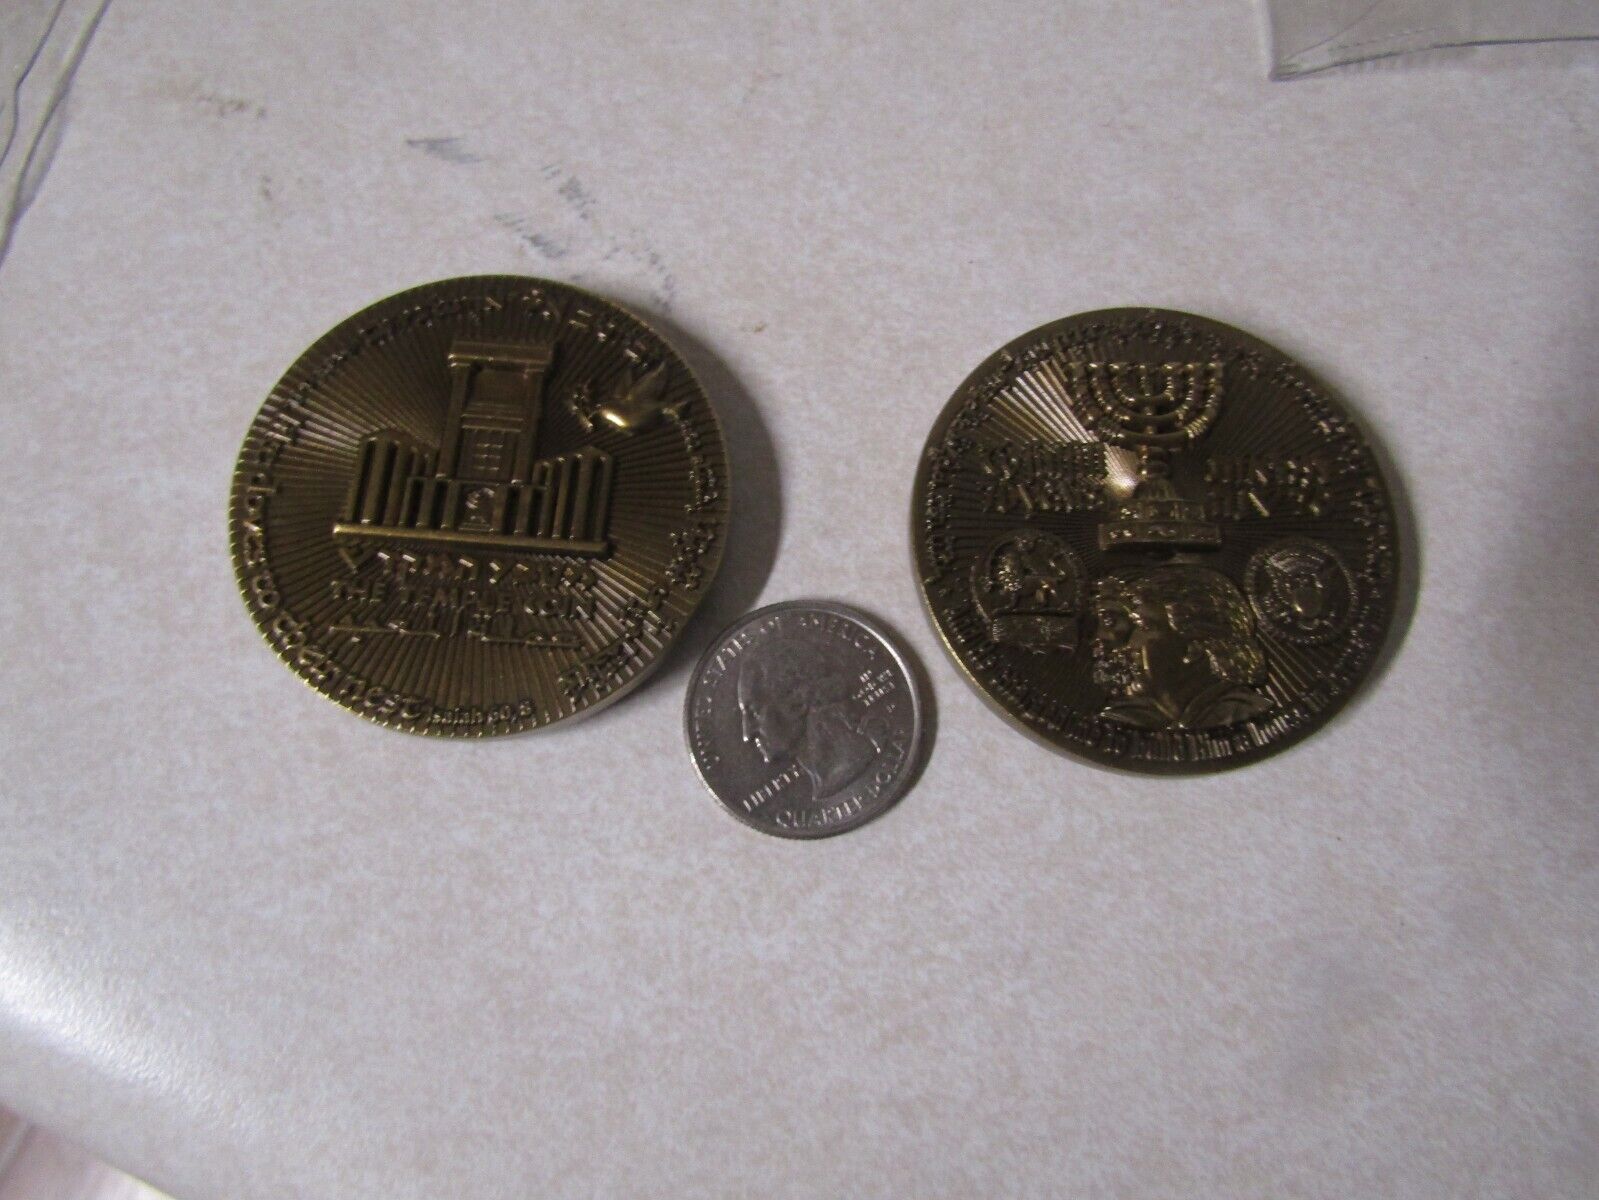 CHALLENGE COIN THE TEMPLE COIN TO FULFILL 70 YEARS JERUSALEM CAPITAL OF ISRAEL